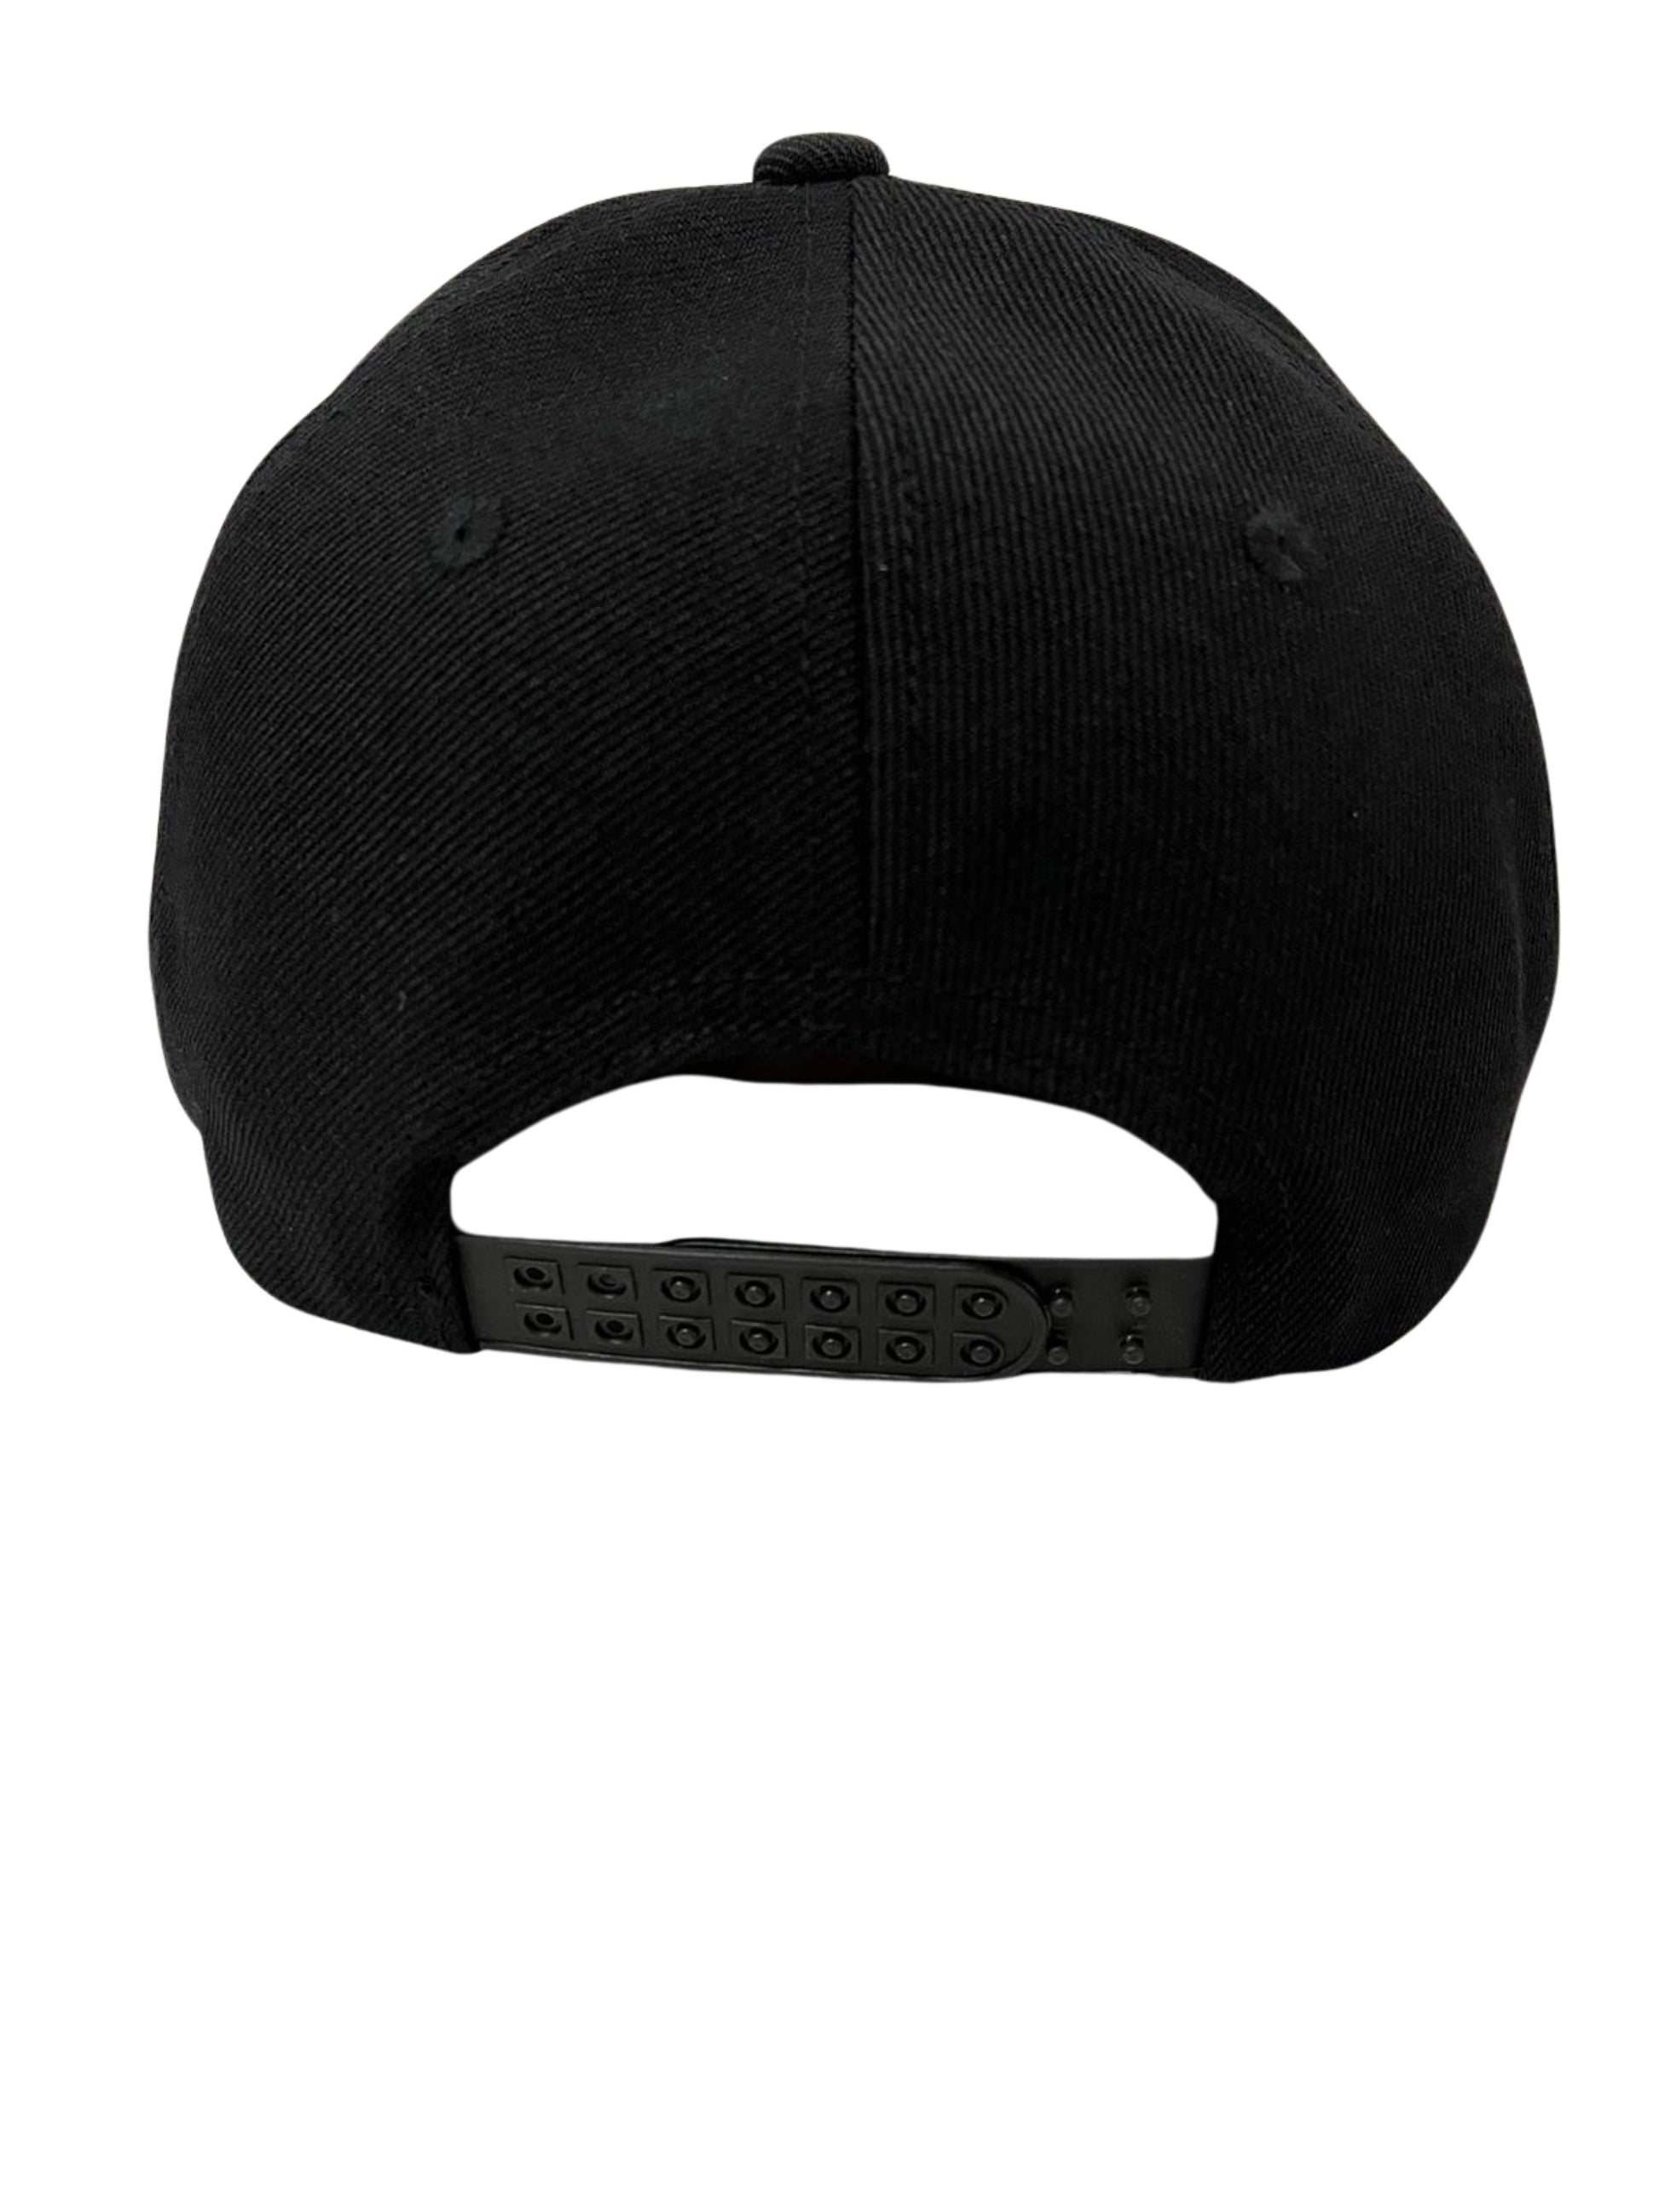 Aleister Crowley Baseball Hat - Back View - The Cap Dudes